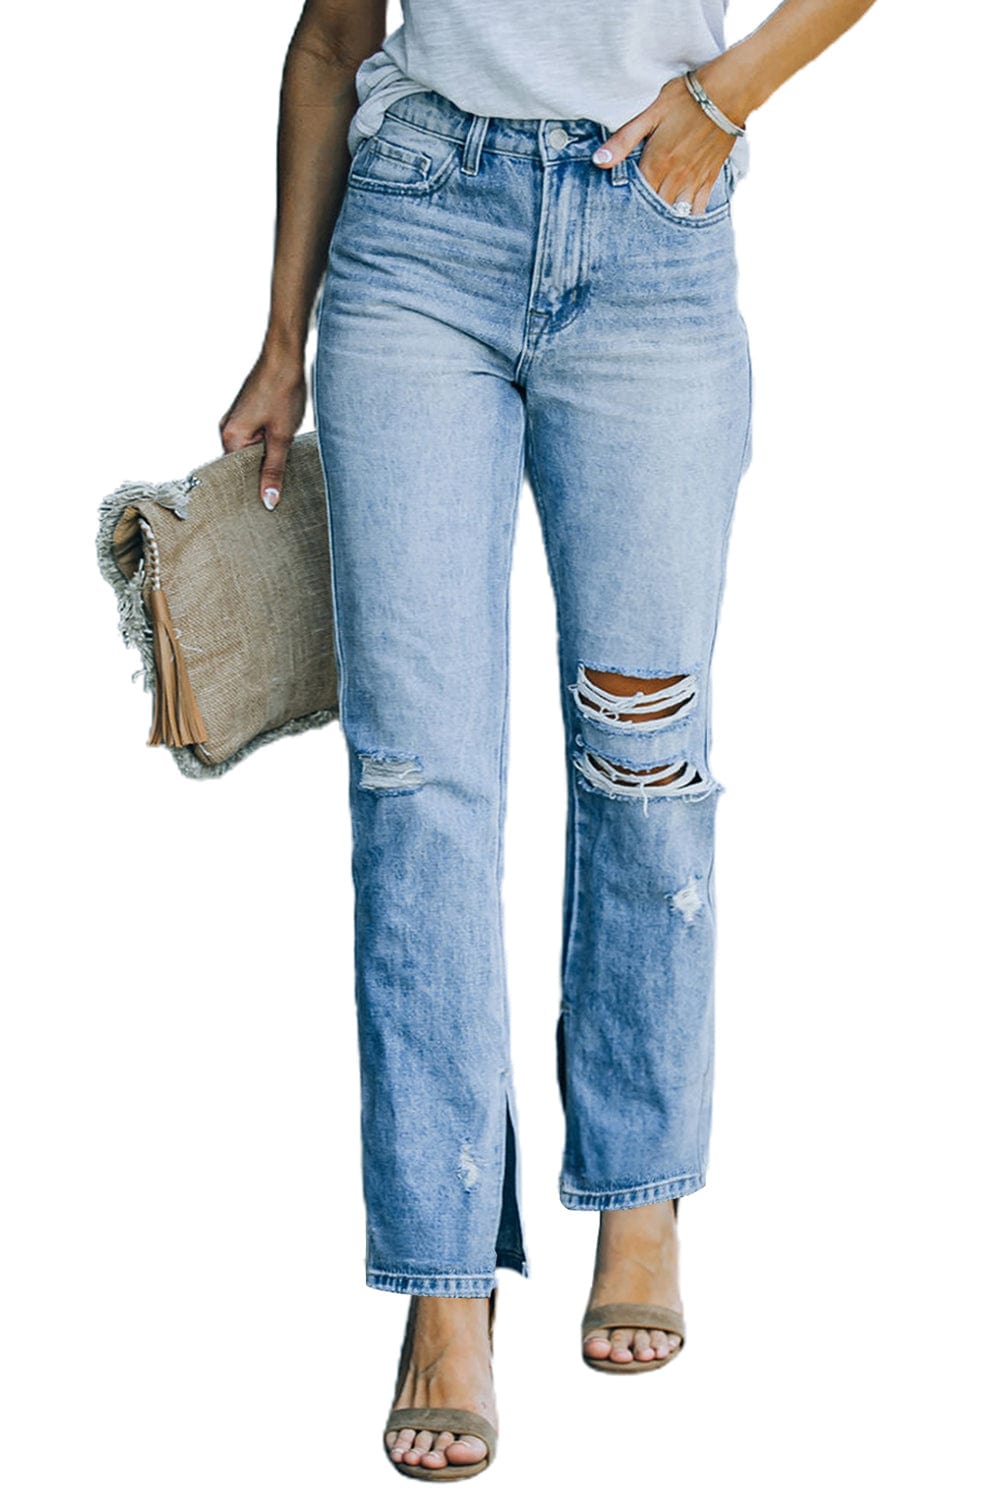 The802Gypsy  pants TRAVELING GYPSY-Straight Leg High Waist Jeans